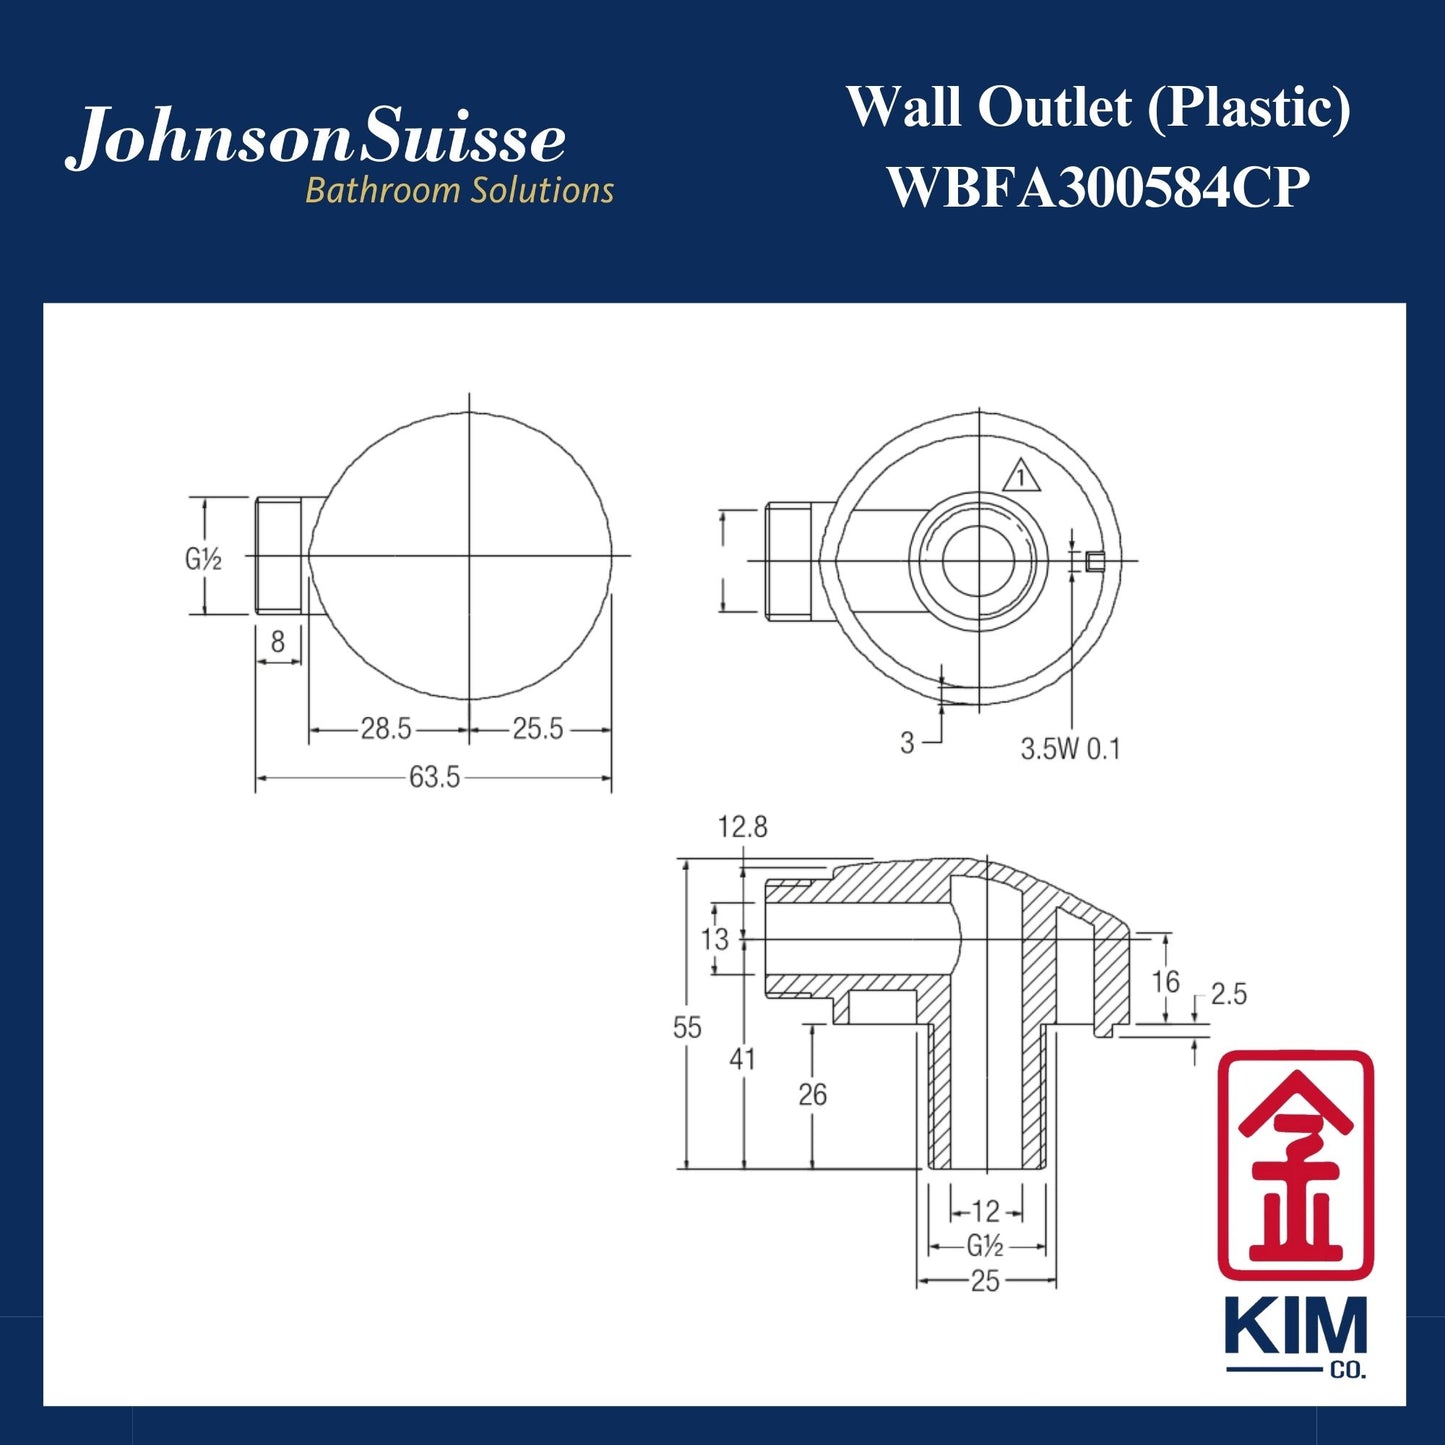 Johnson Suisse Wall Outlet (Plastic) (WBFA300584CP)